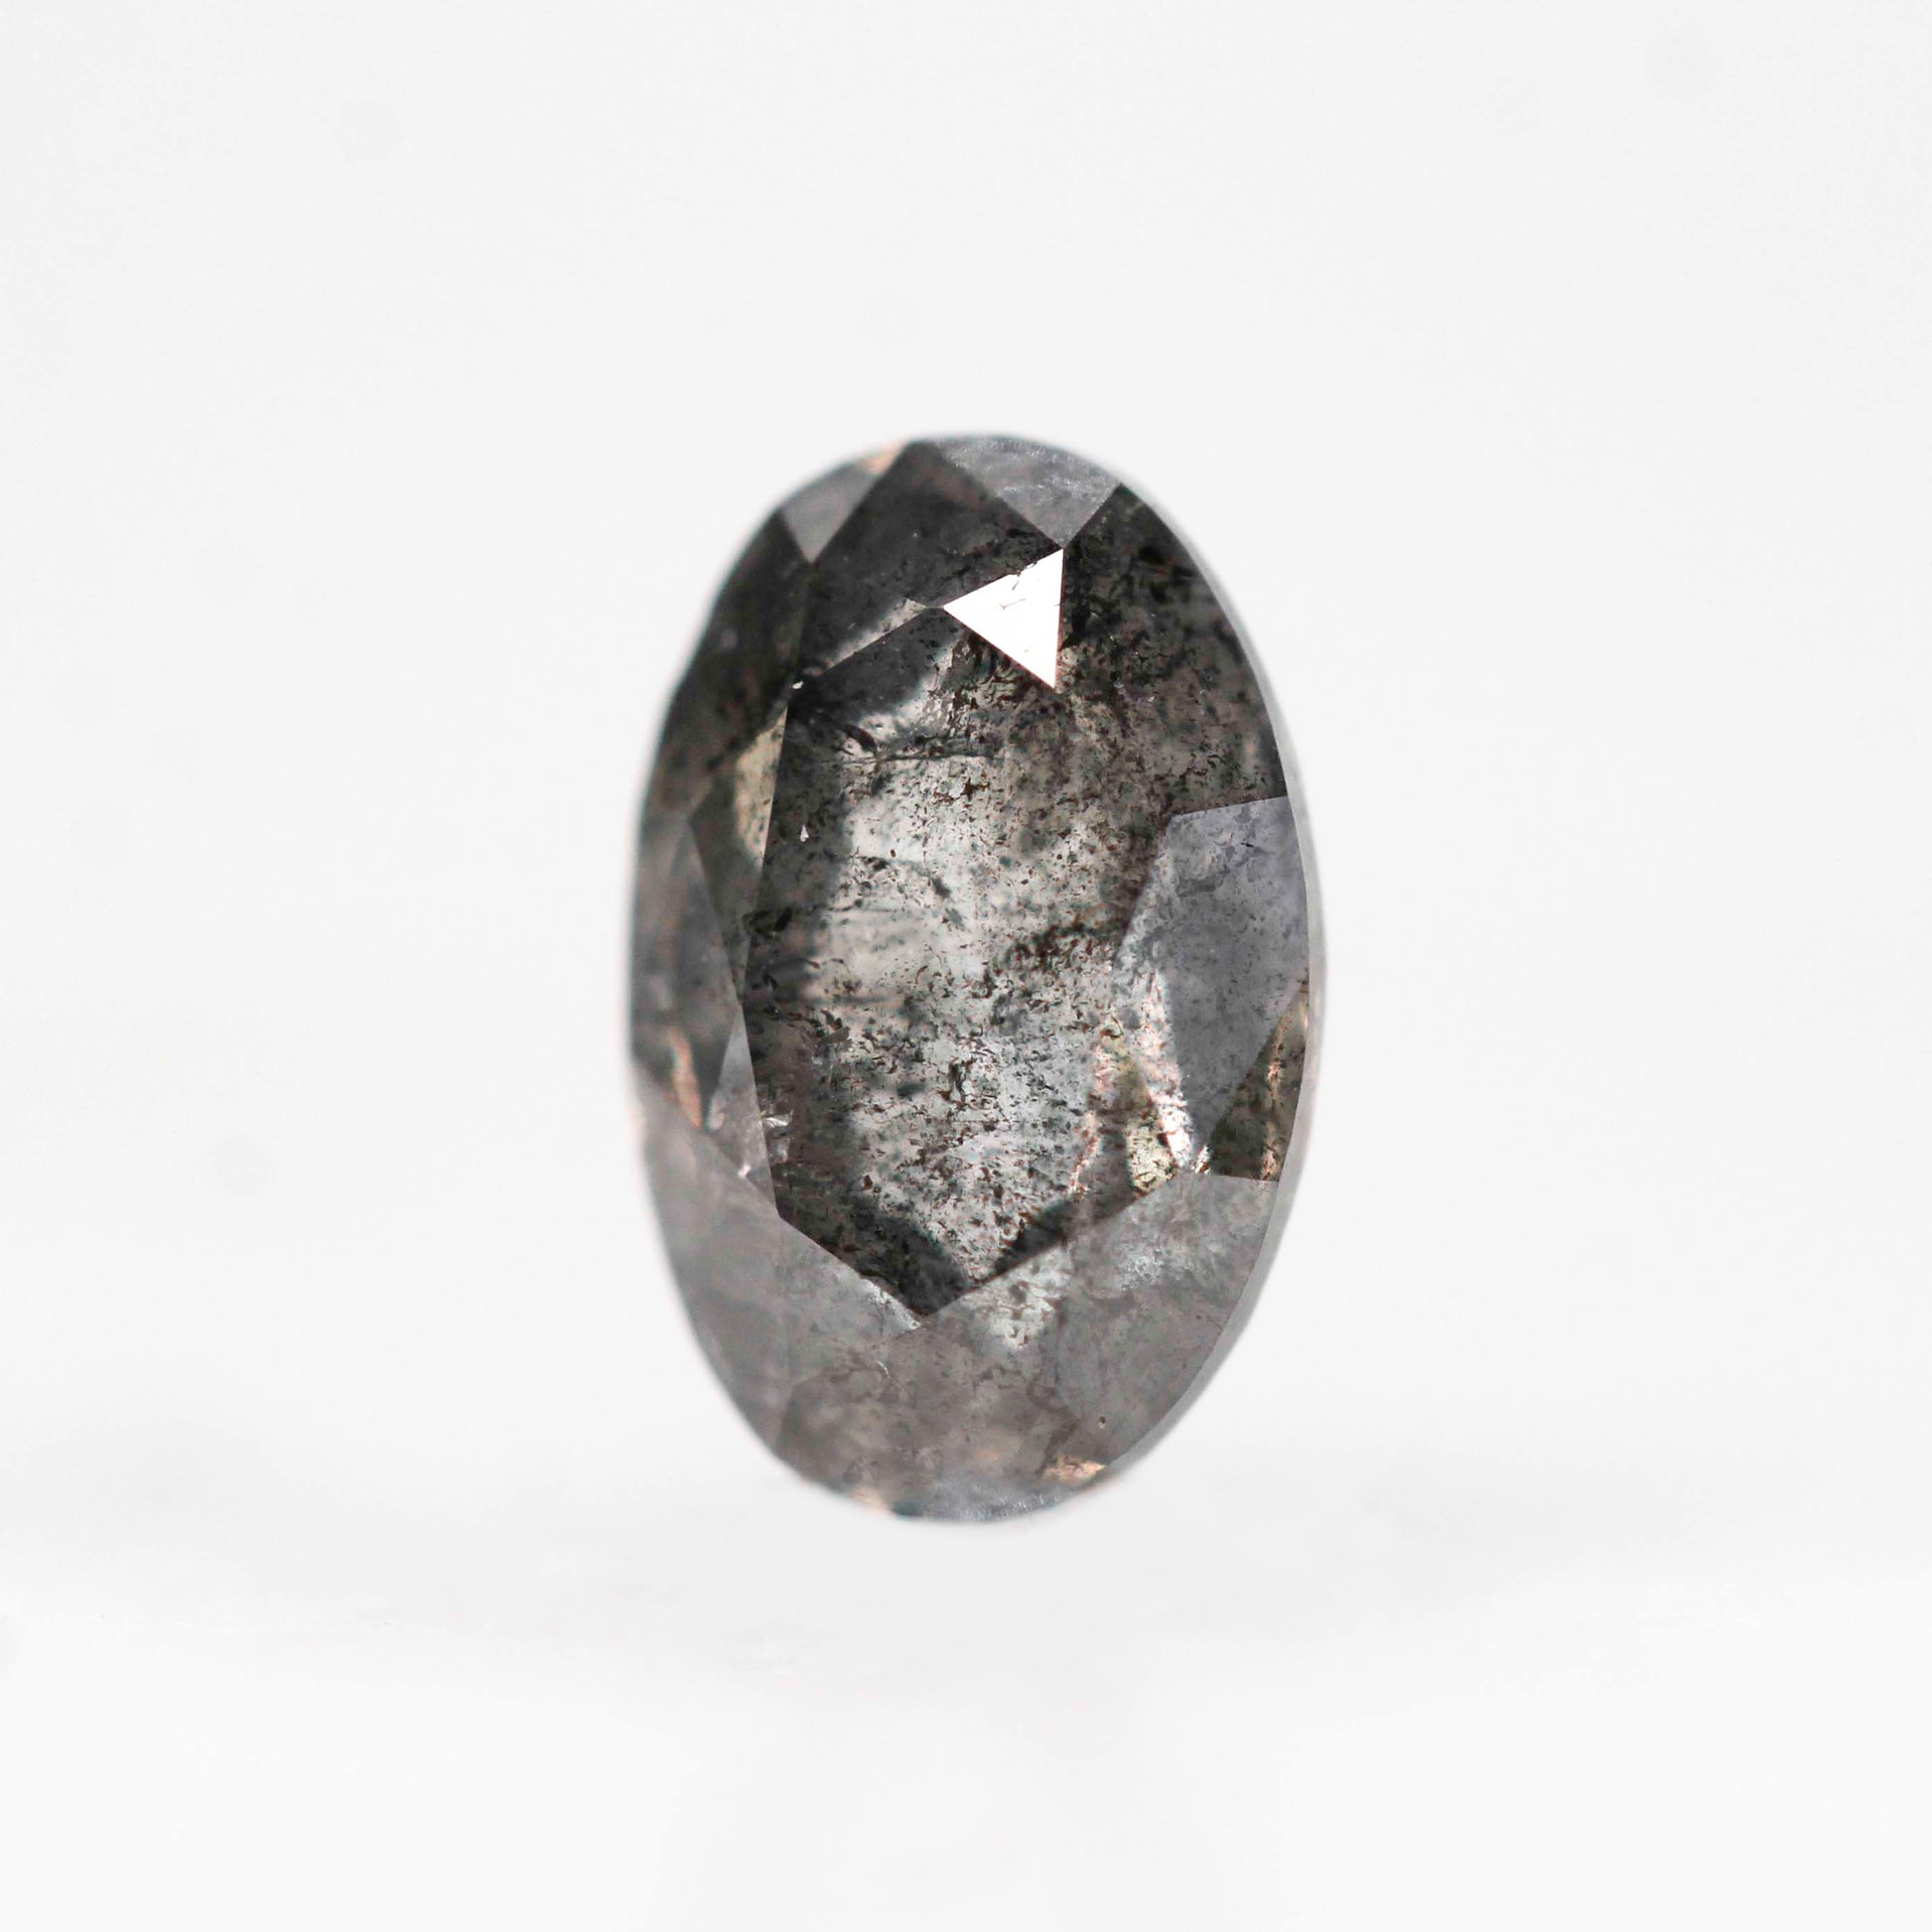 0.72 Carat Dark Gray Celestial Oval Diamond for Custom Work - Inventory Code DSO072 - Midwinter Co. Alternative Bridal Rings and Modern Fine Jewelry